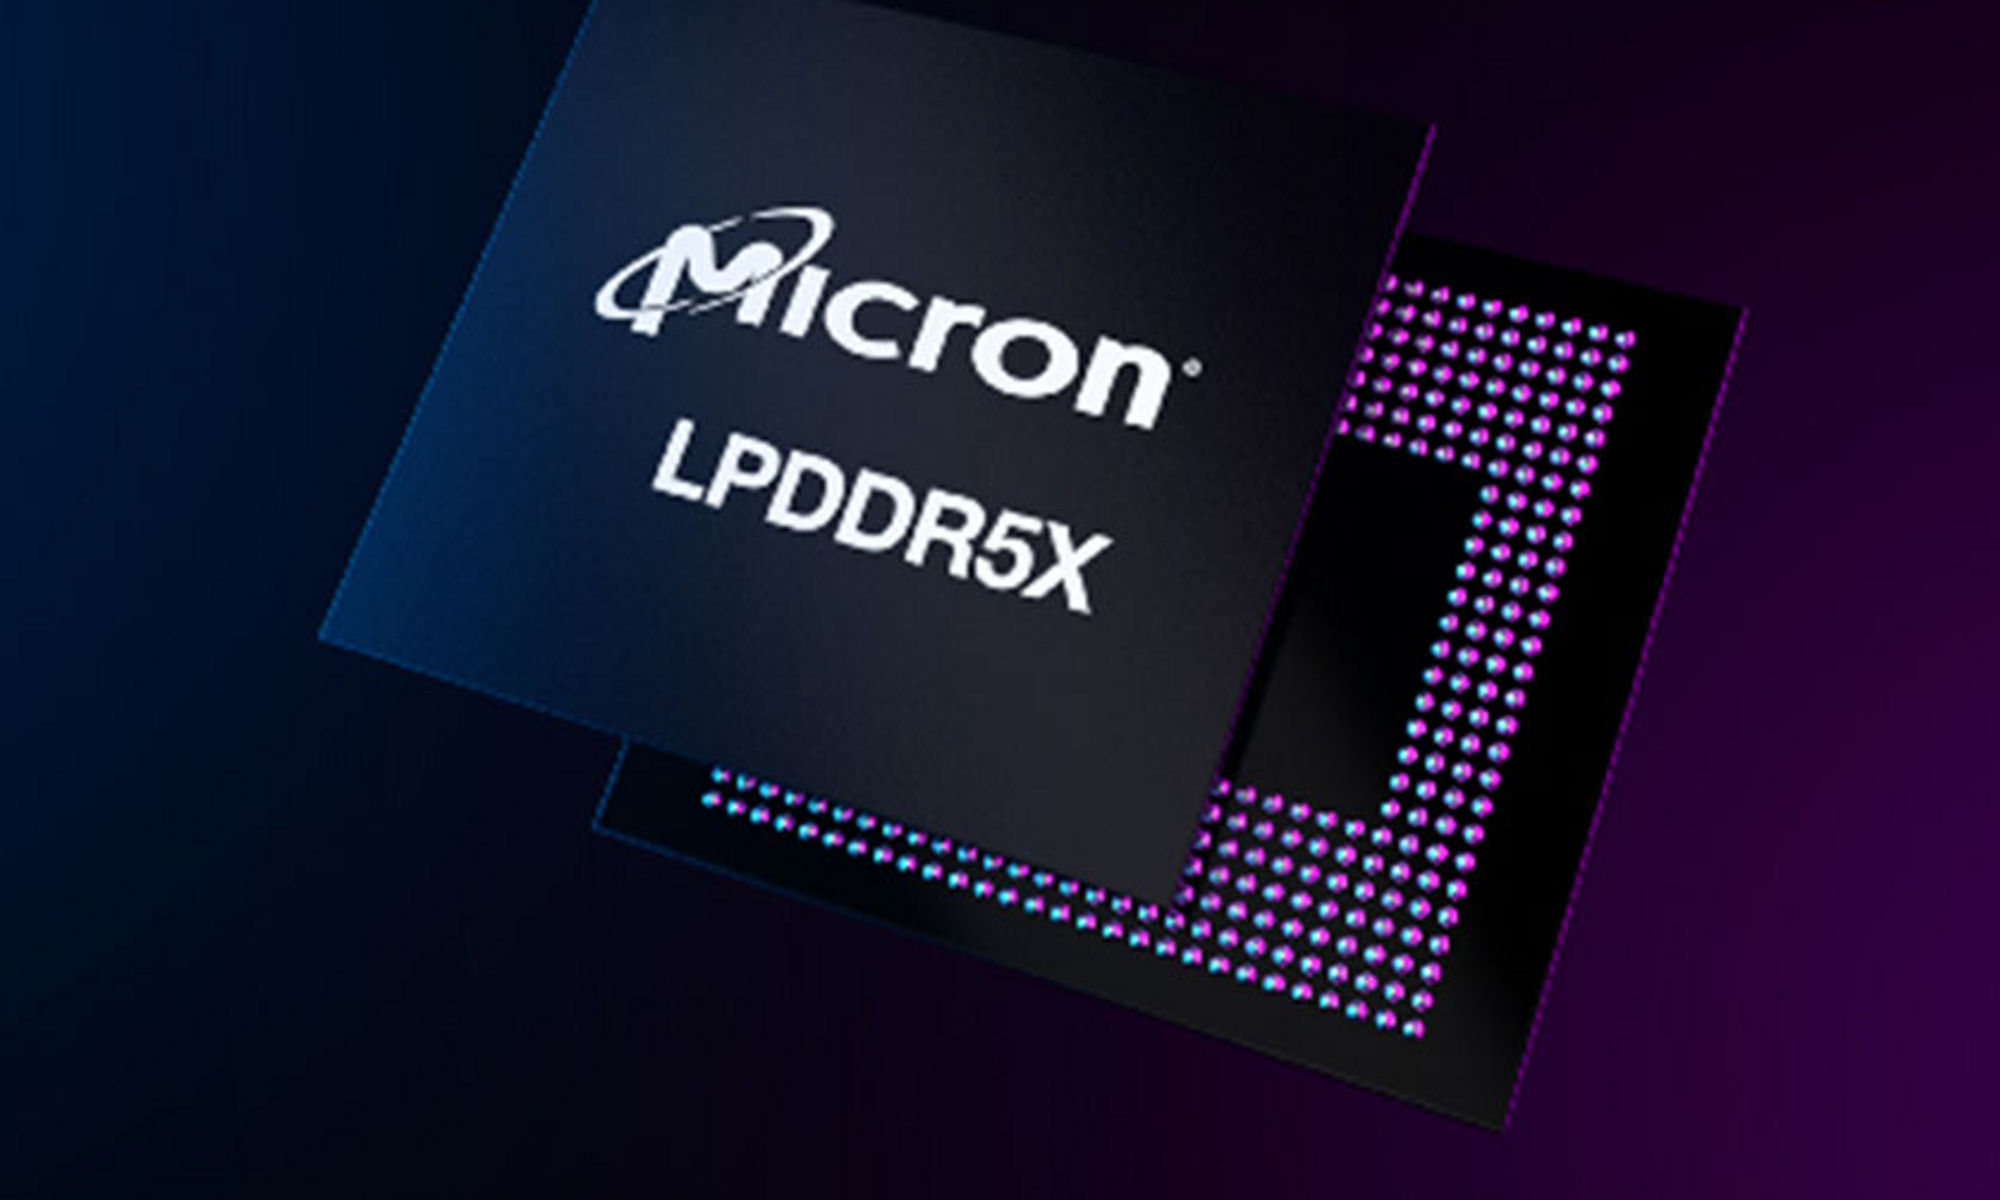 LPDDR5X chip front and back